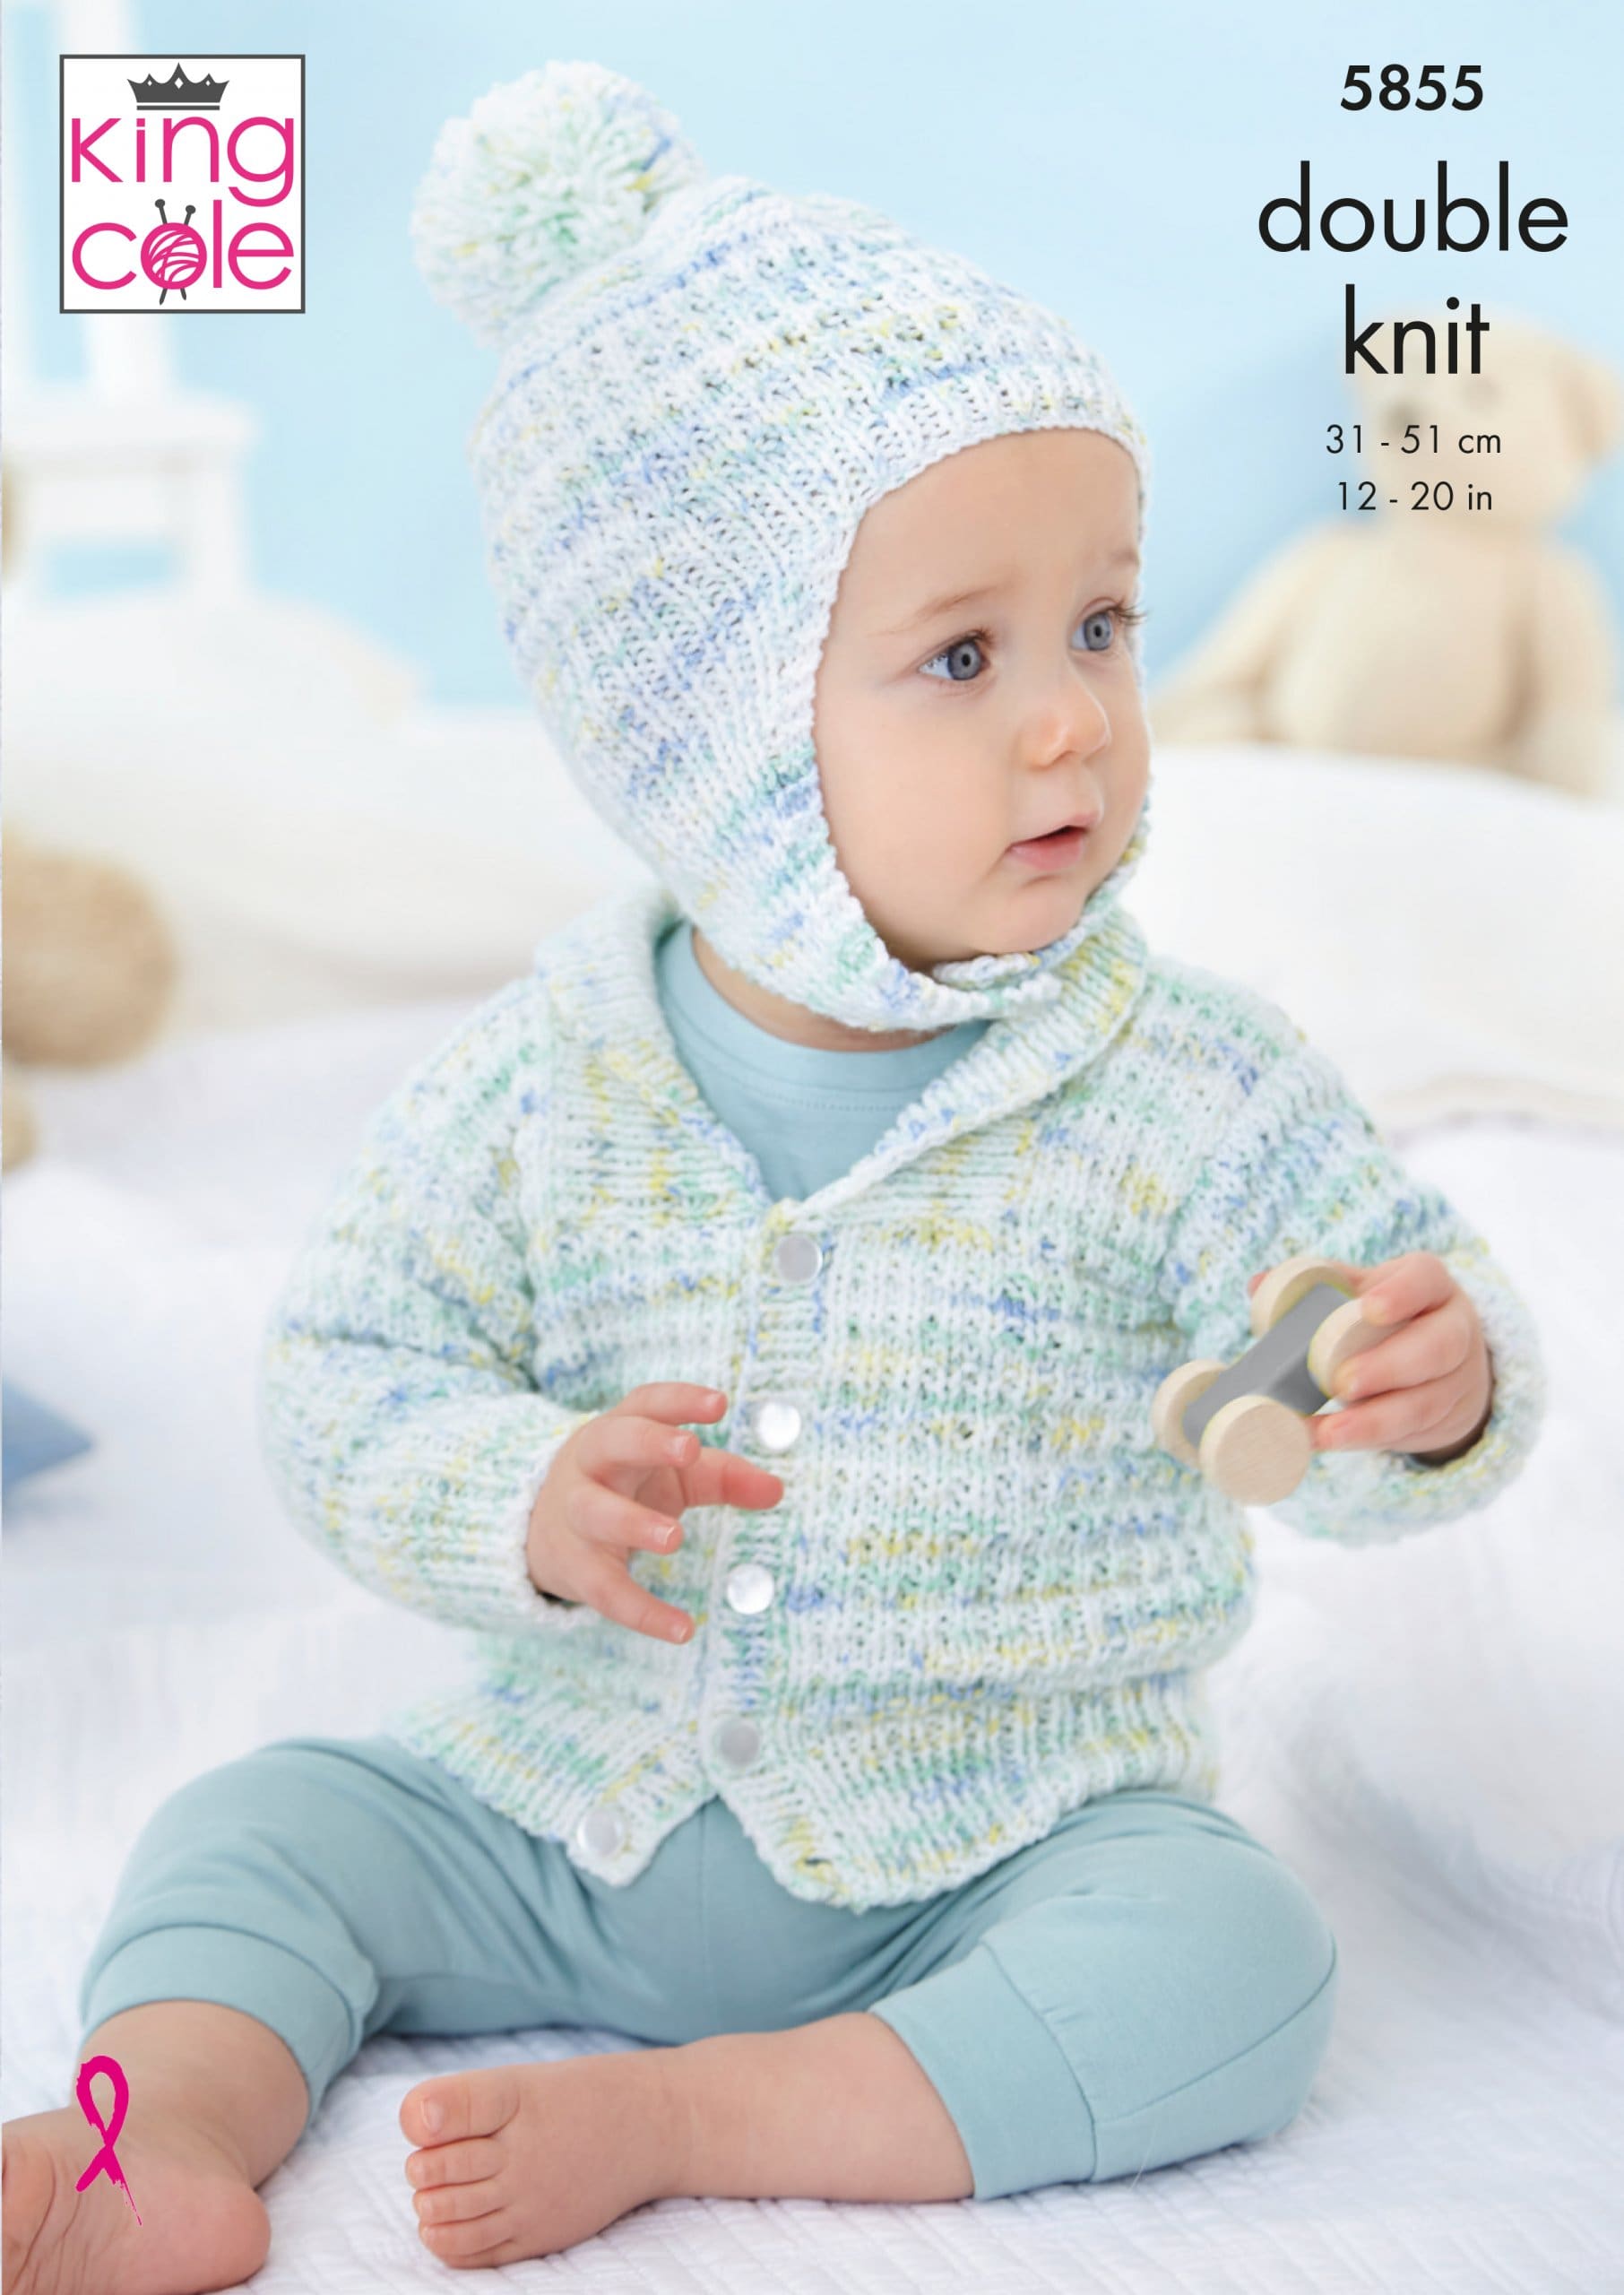 Easy to Follow Dungarees, Jacket & Hat Knitted in Little Treasures DK ...